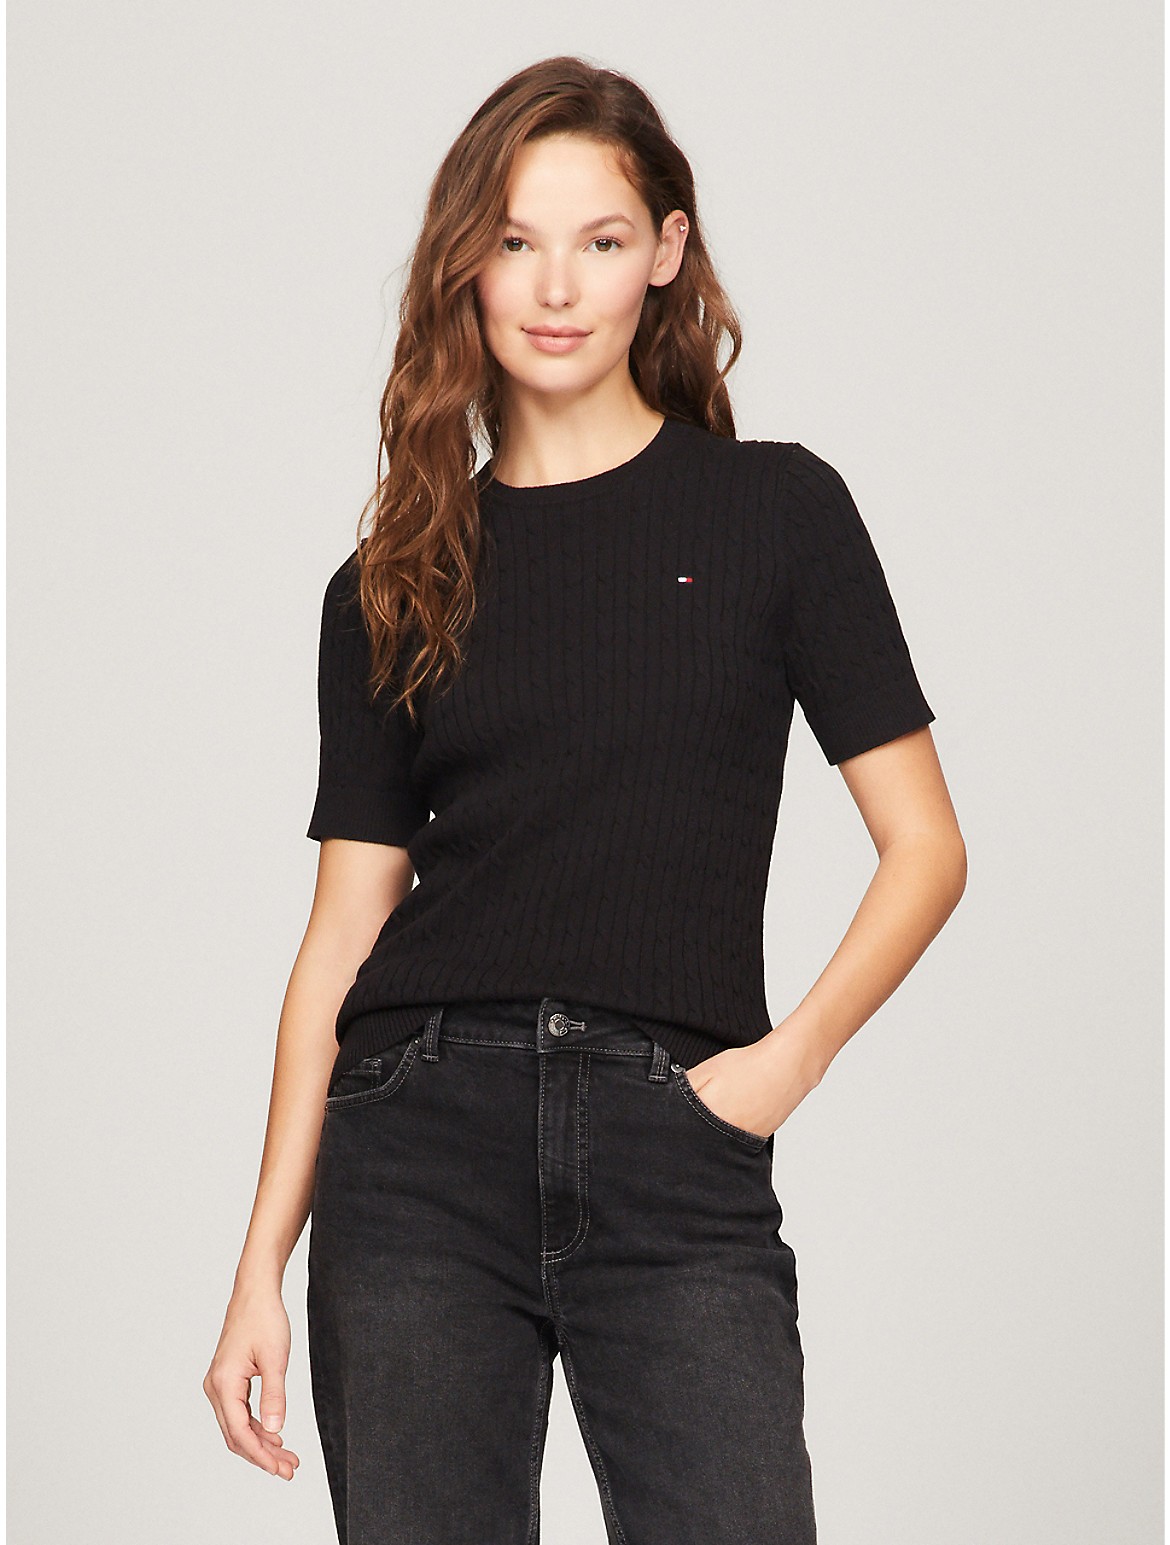 Tommy Hilfiger Women's Short-Sleeve Cable Sweater - Black - XXS